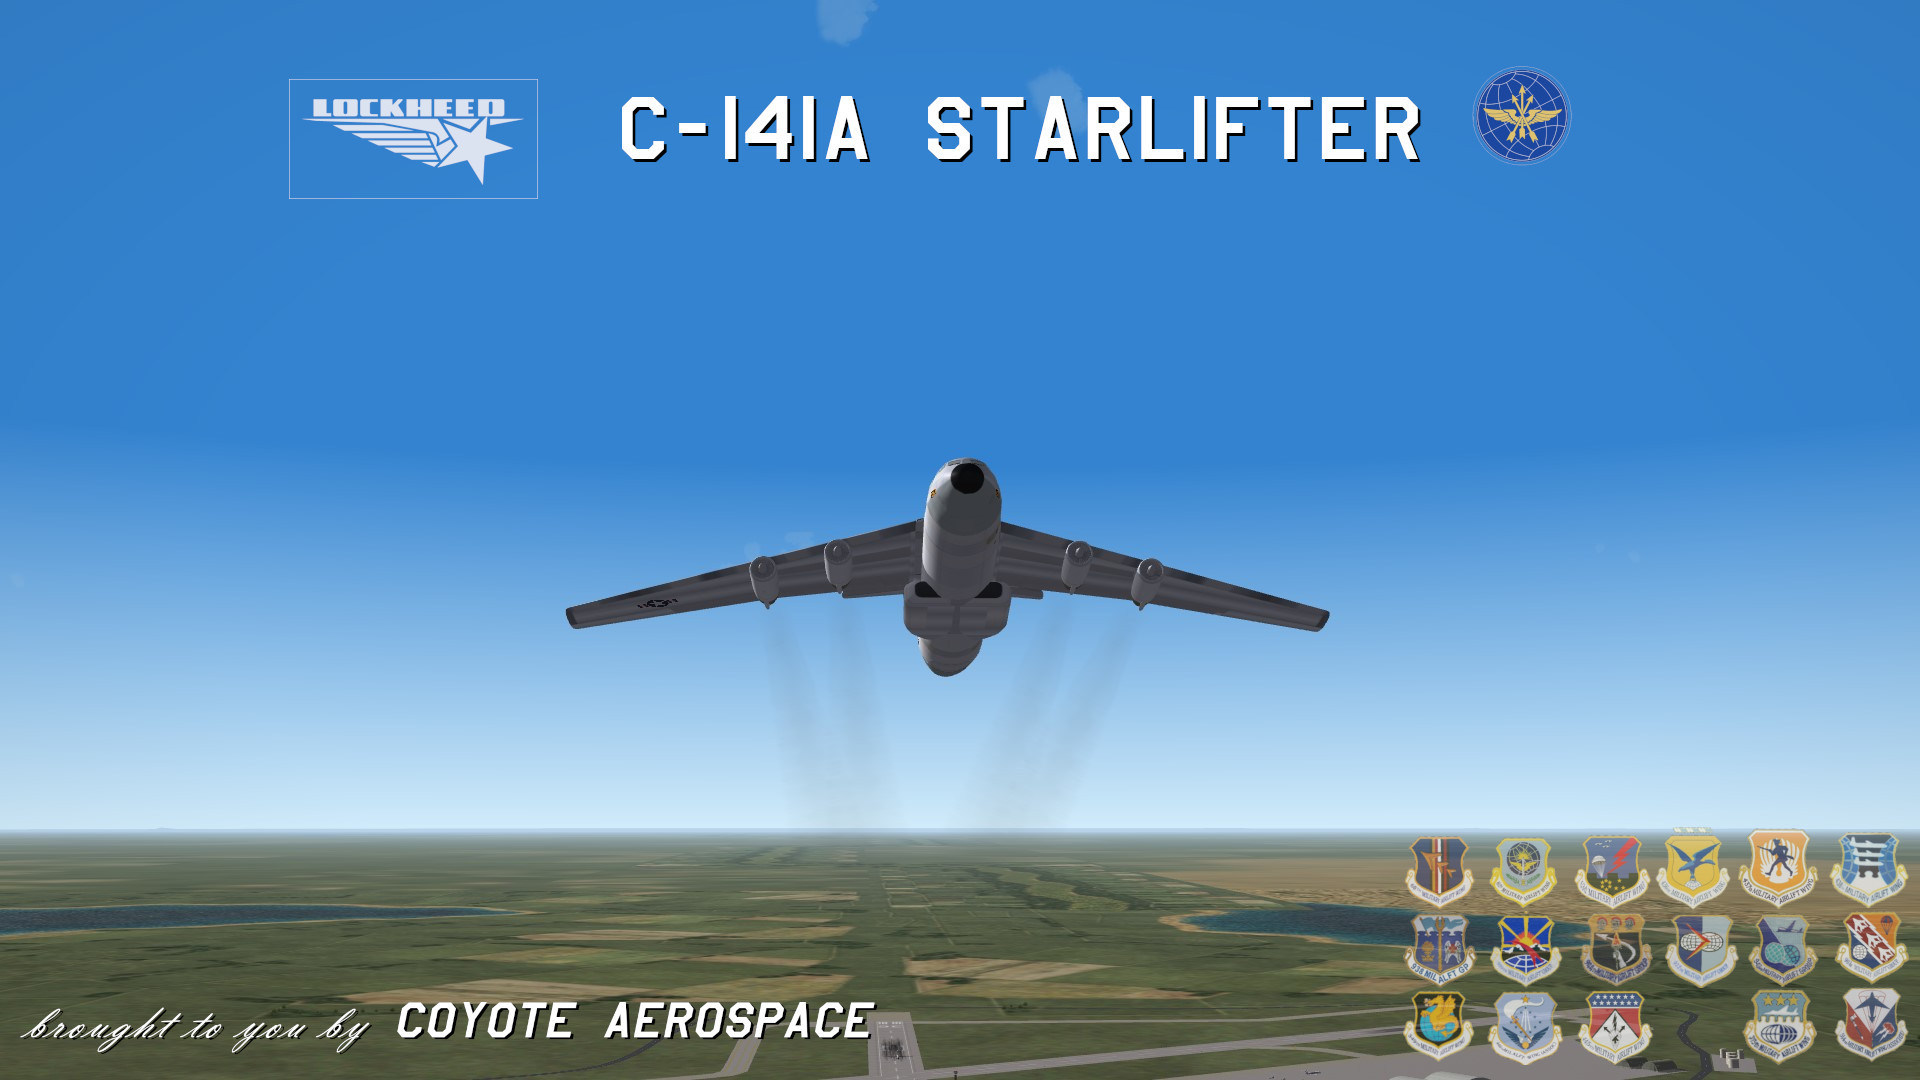 C-141A Starlifter (by Coyote Aerospace)